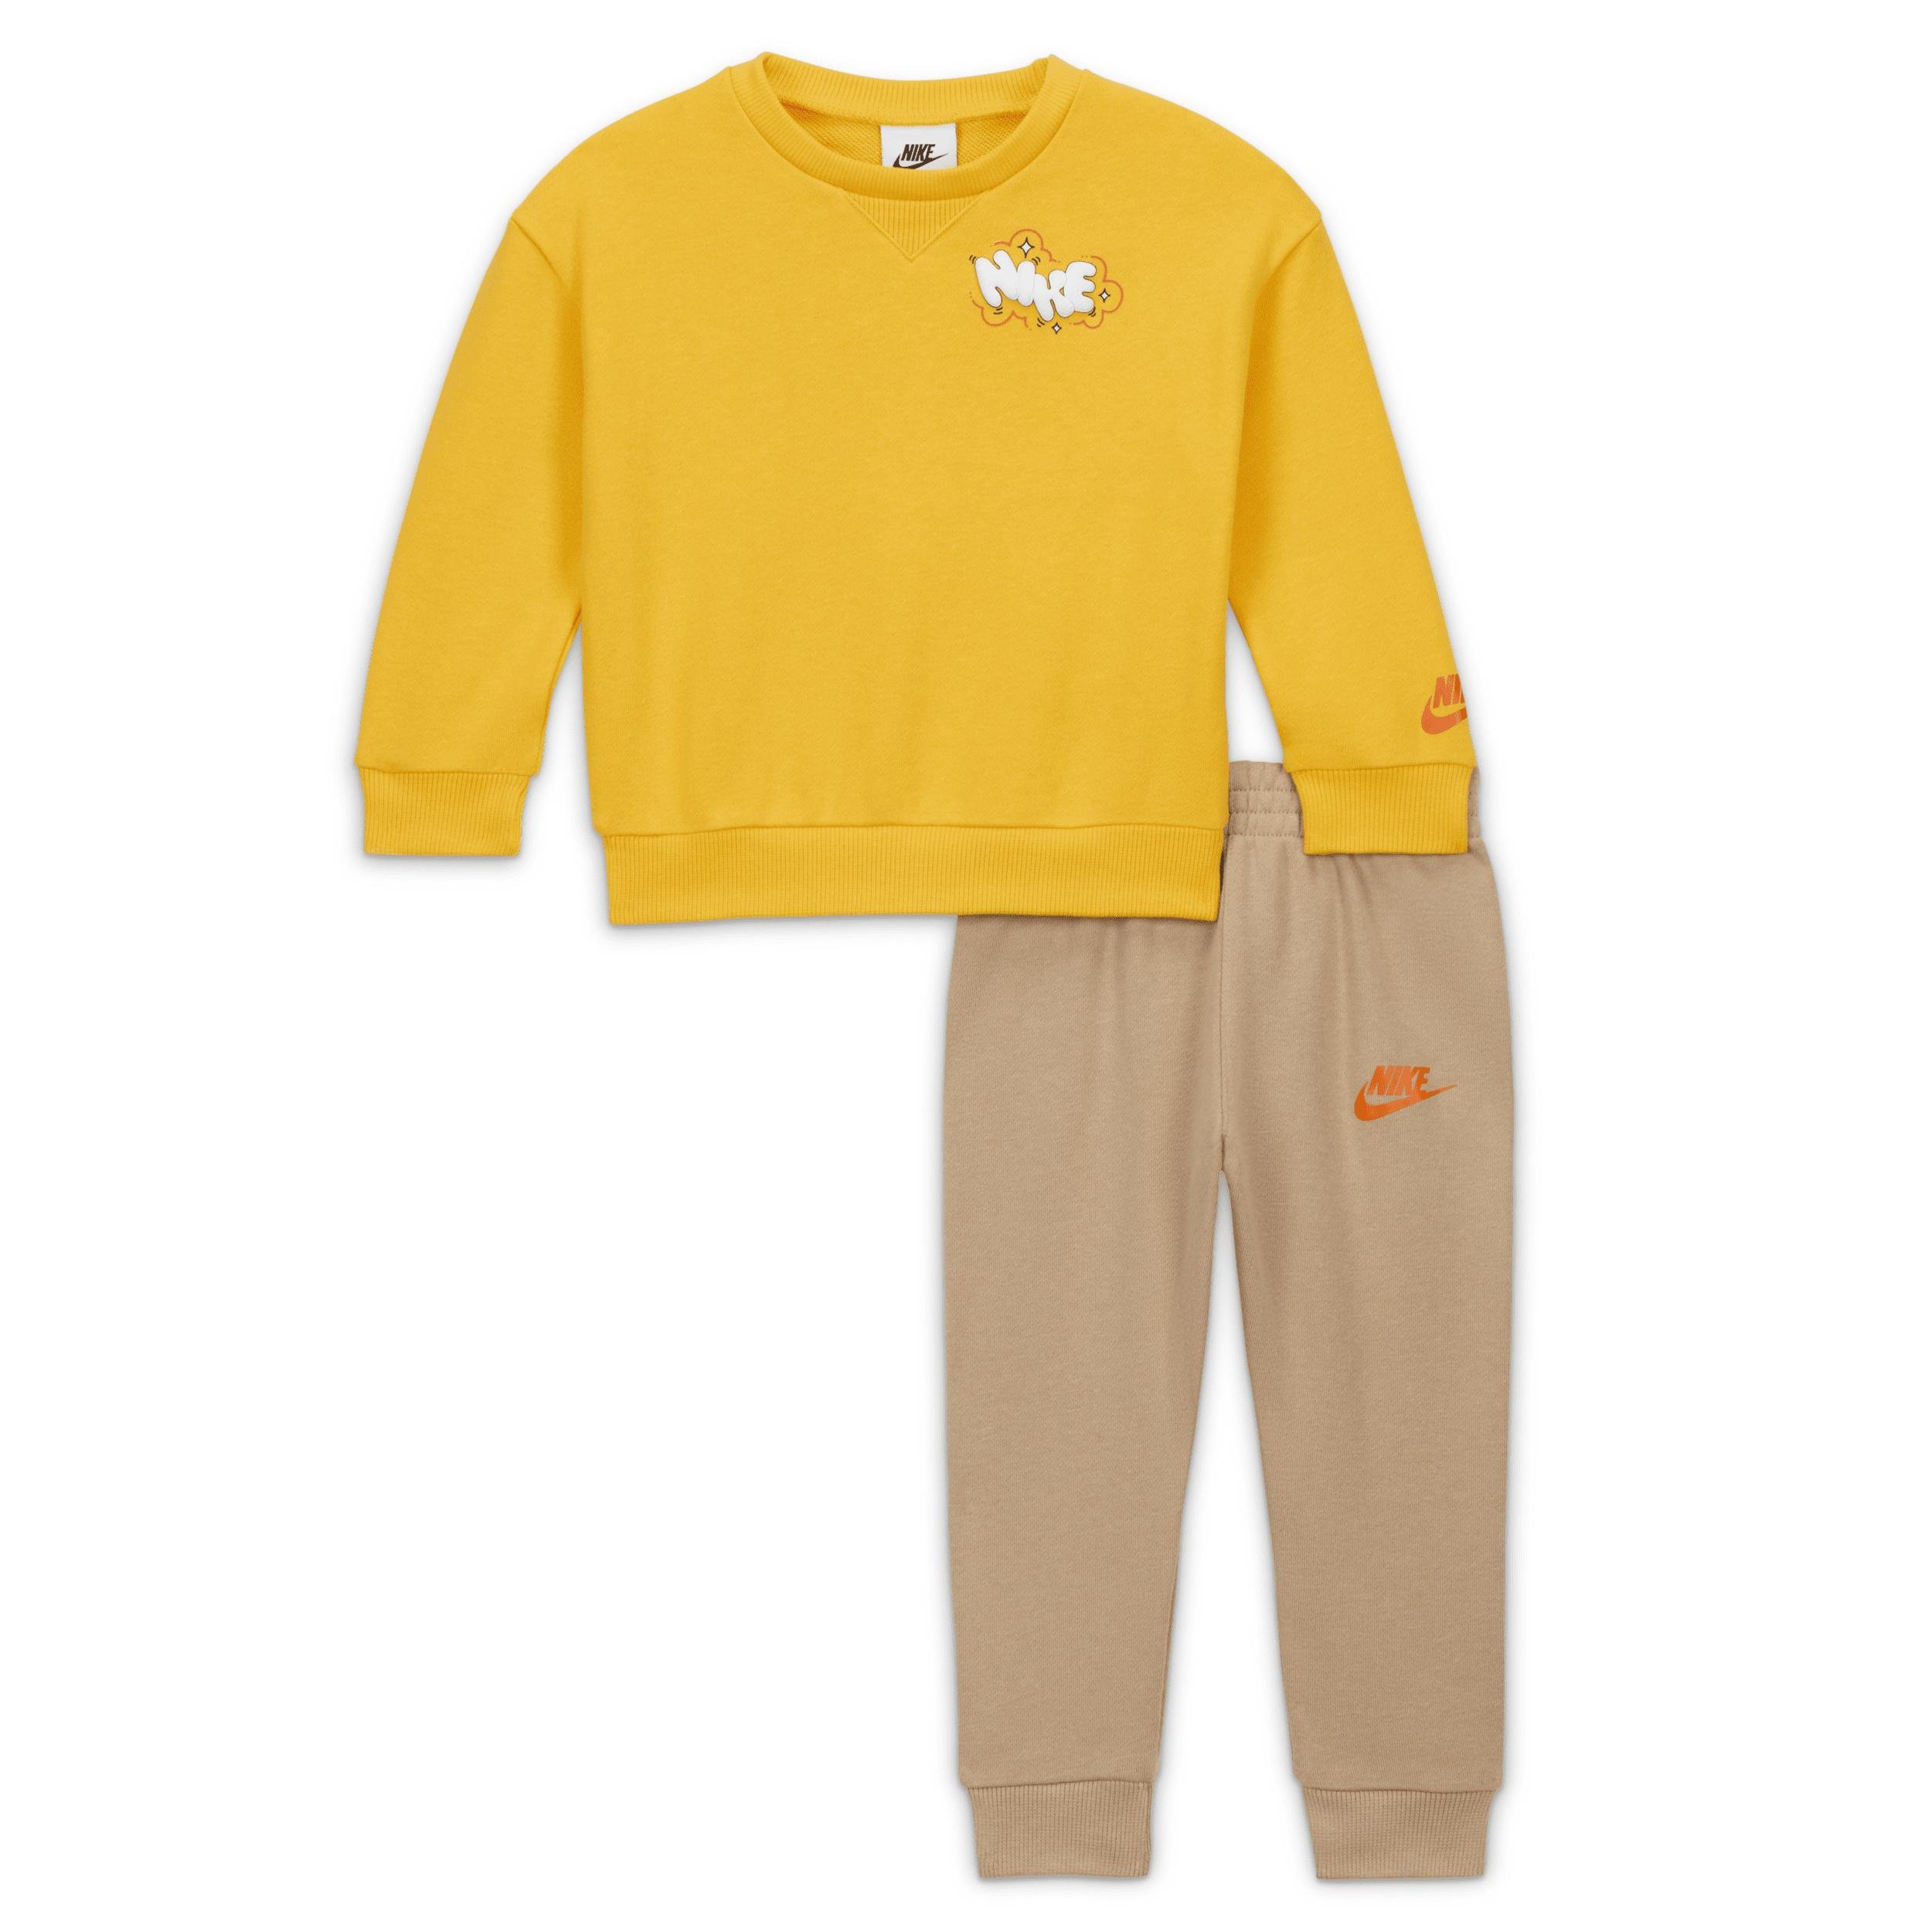 Nike Sportswear Create Your Own Adventure Baby (12-24M) French Terry Graphic Crew Set by NIKE